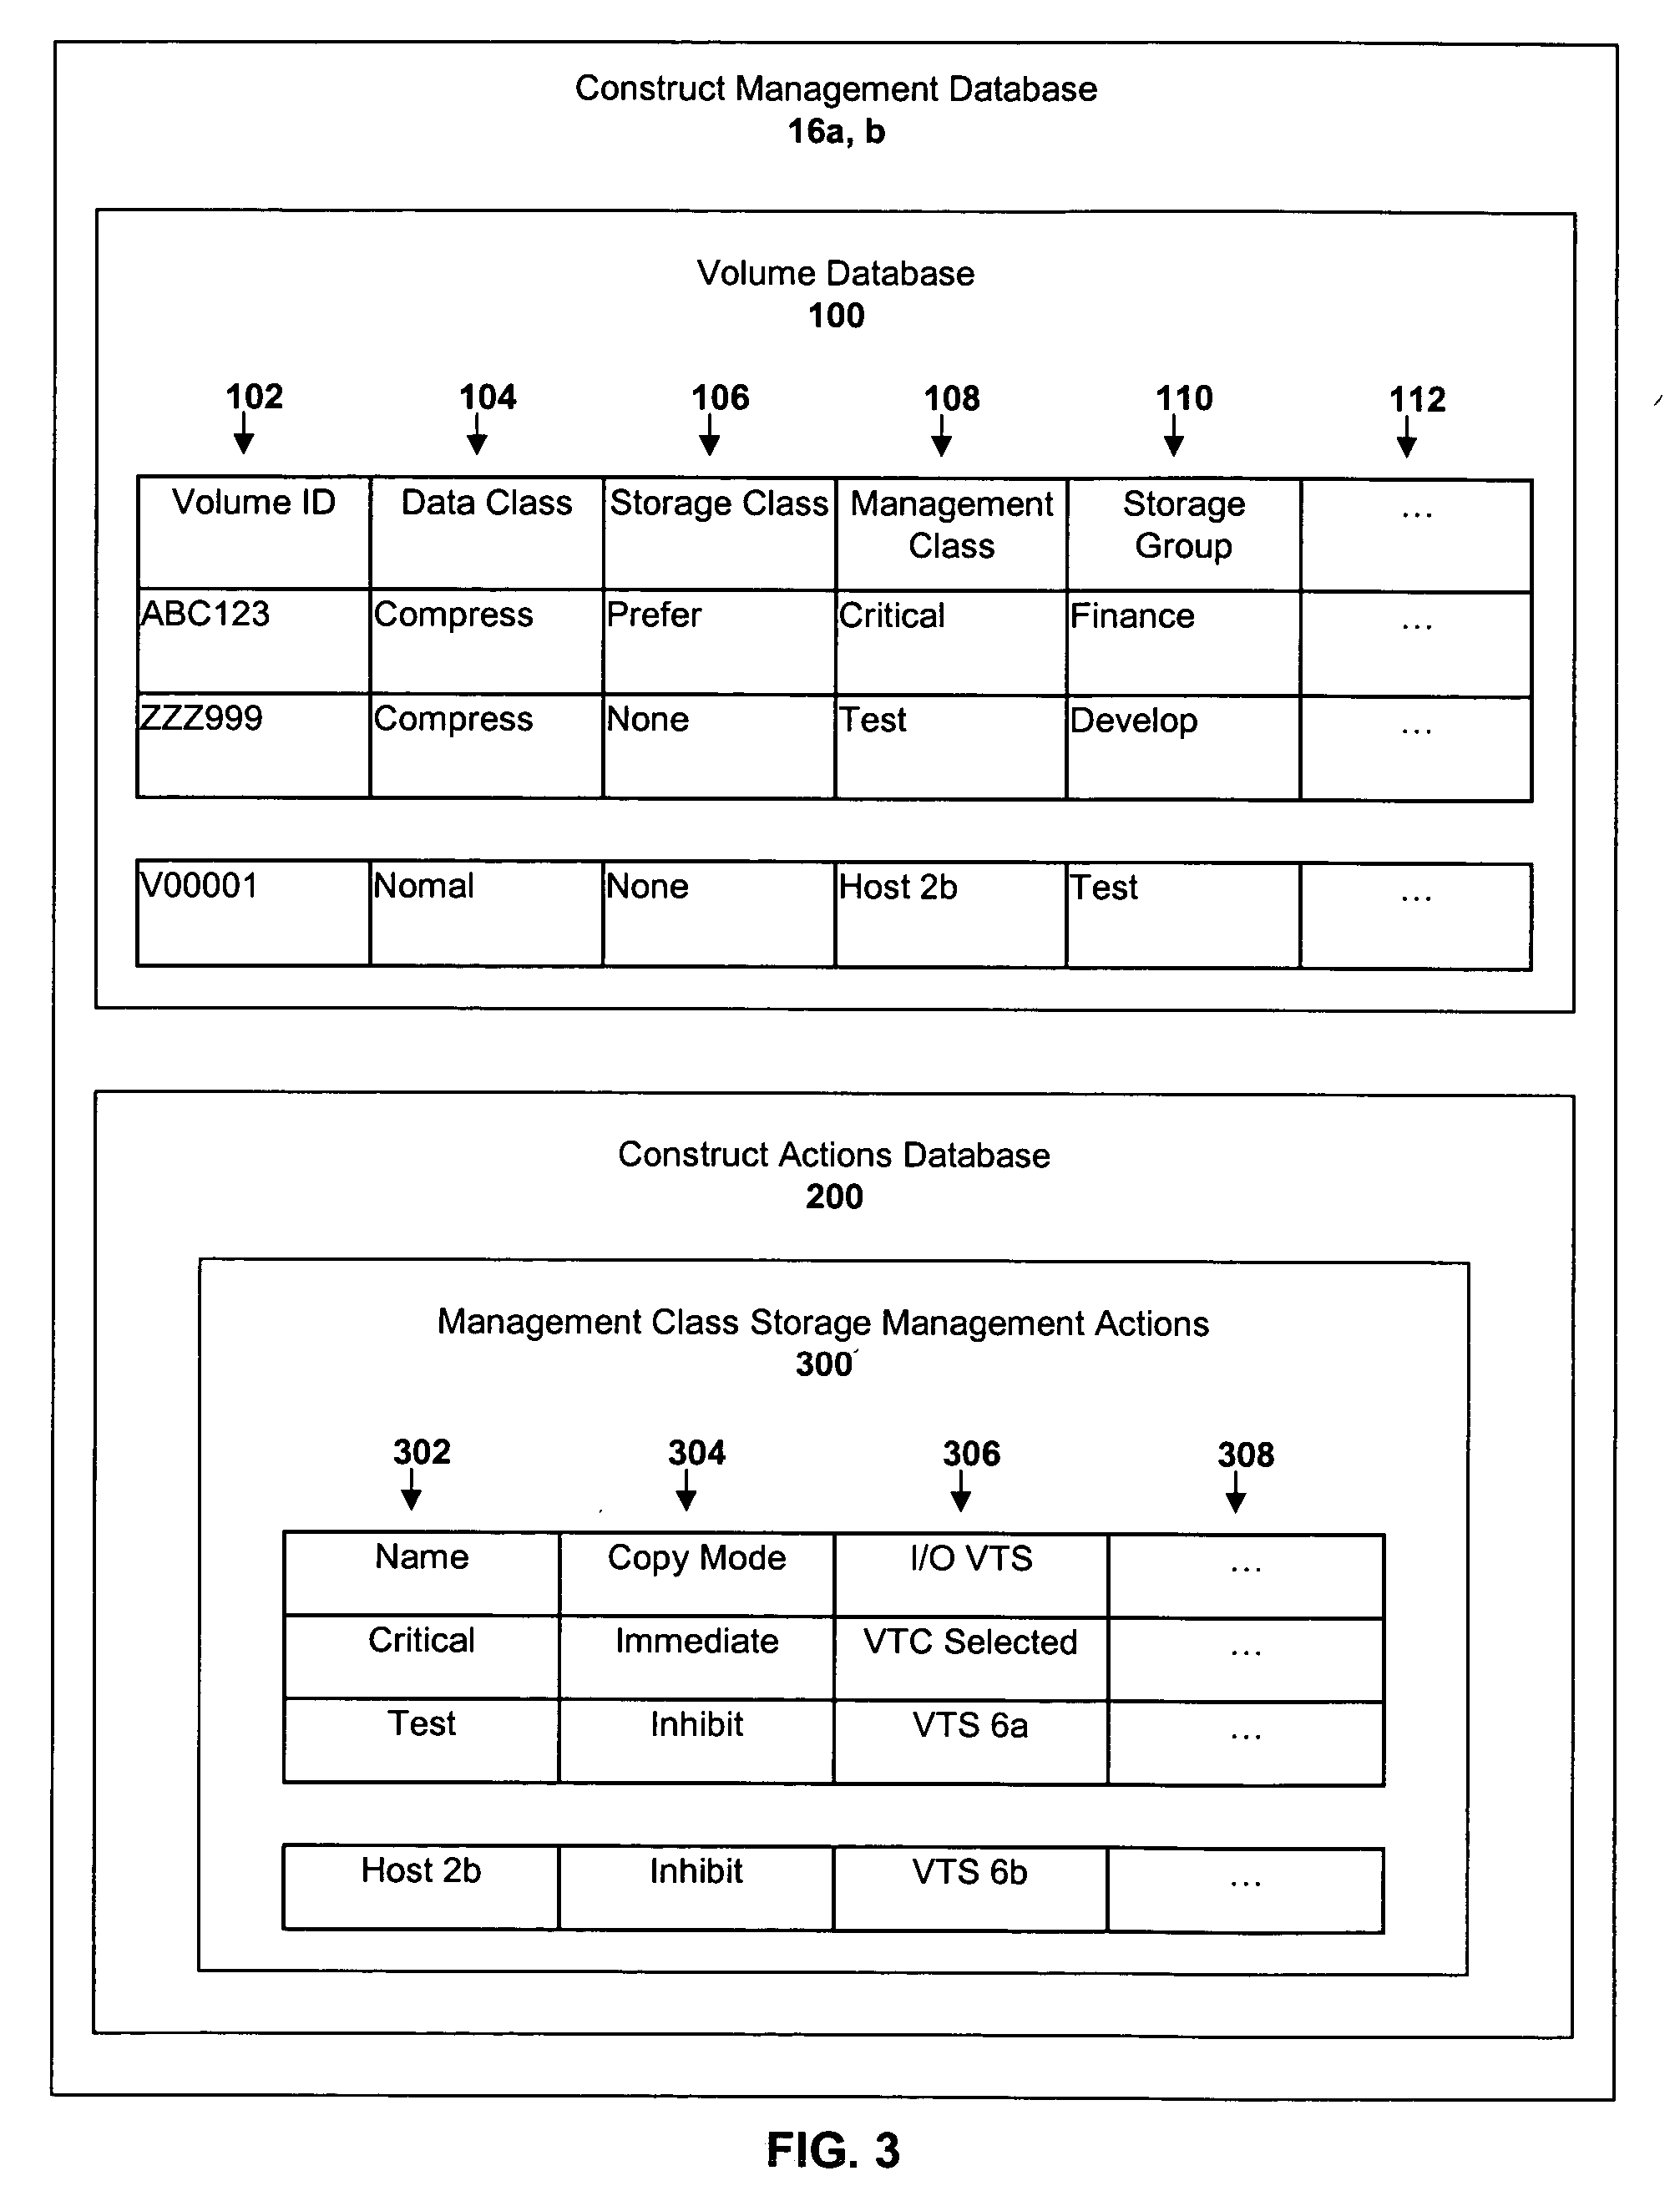 Selective dual copy control of data storage and copying in a peer-to-peer virtual tape server system